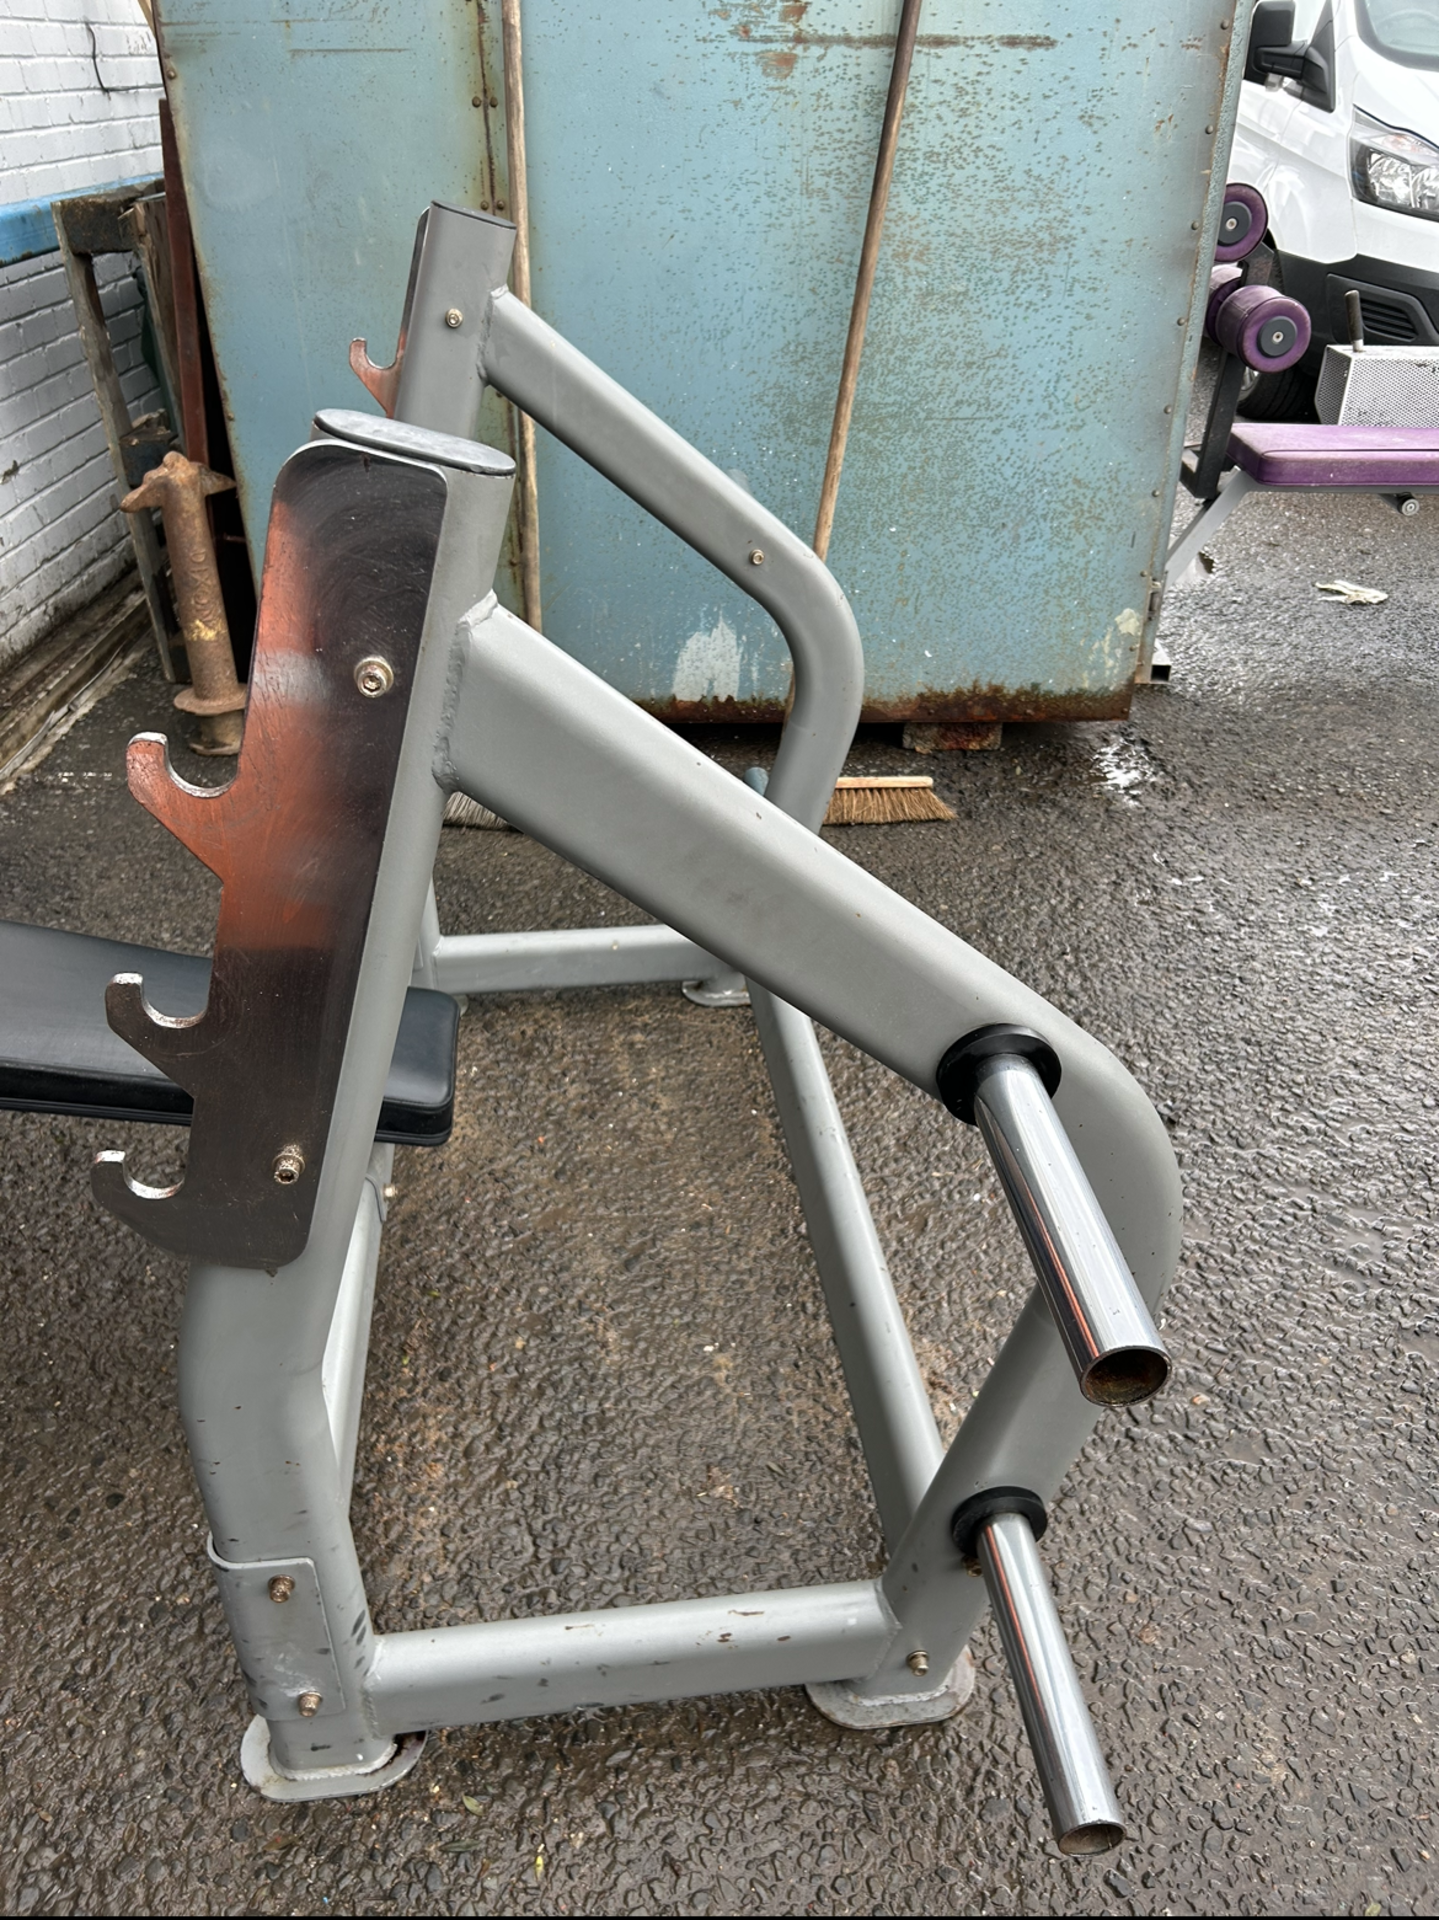 Commercial Olympic decline weight bench press unit. Average condition a few rusty parts shown in the - Image 3 of 3